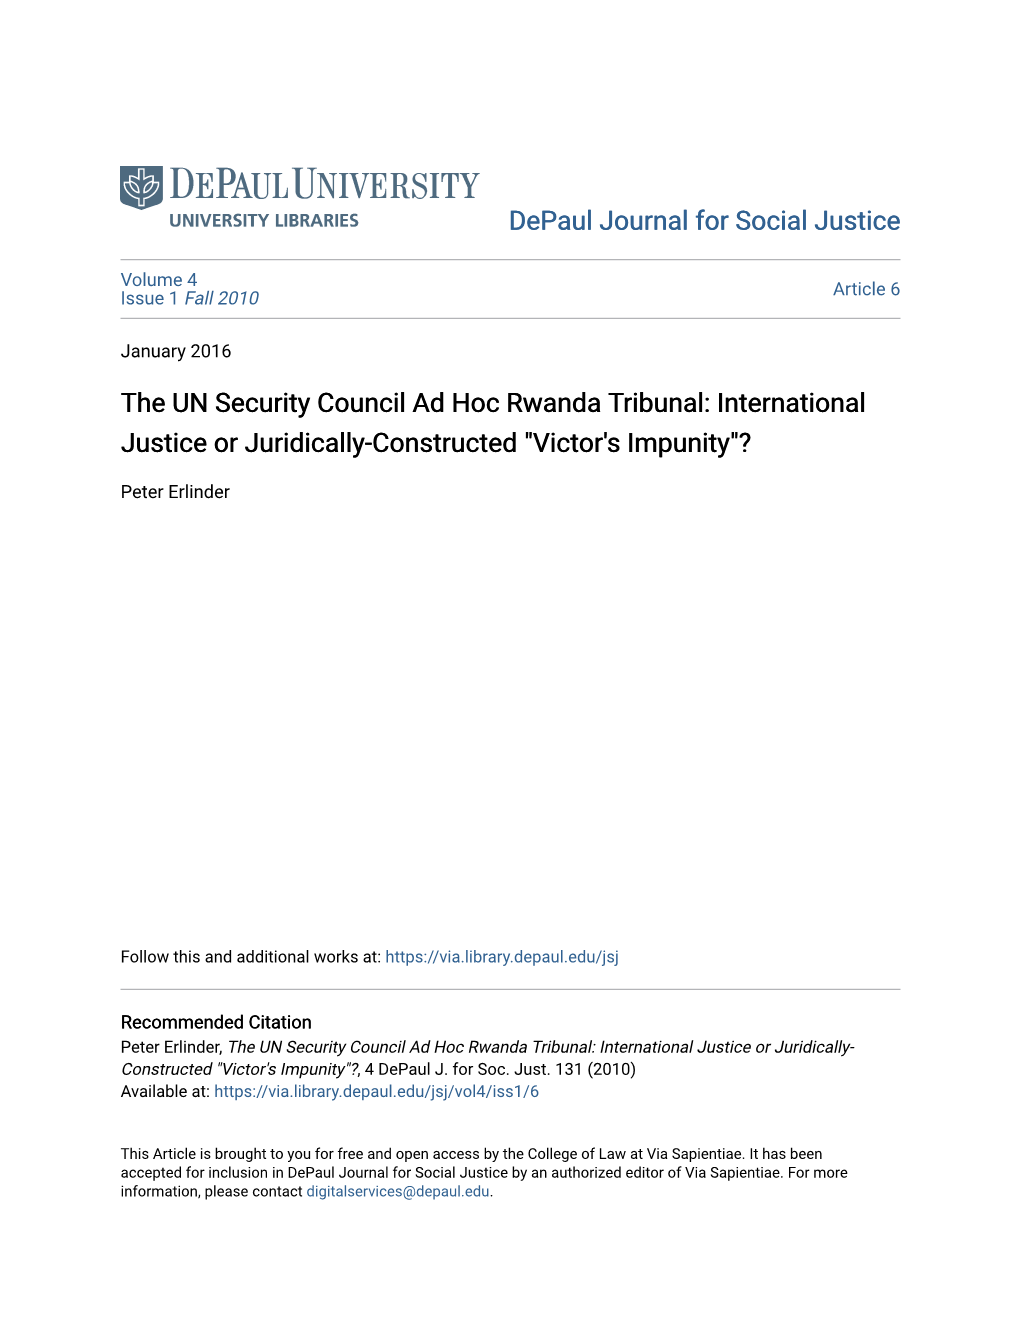 The UN Security Council Ad Hoc Rwanda Tribunal: International Justice Or Juridically-Constructed "Victor's Impunity"?